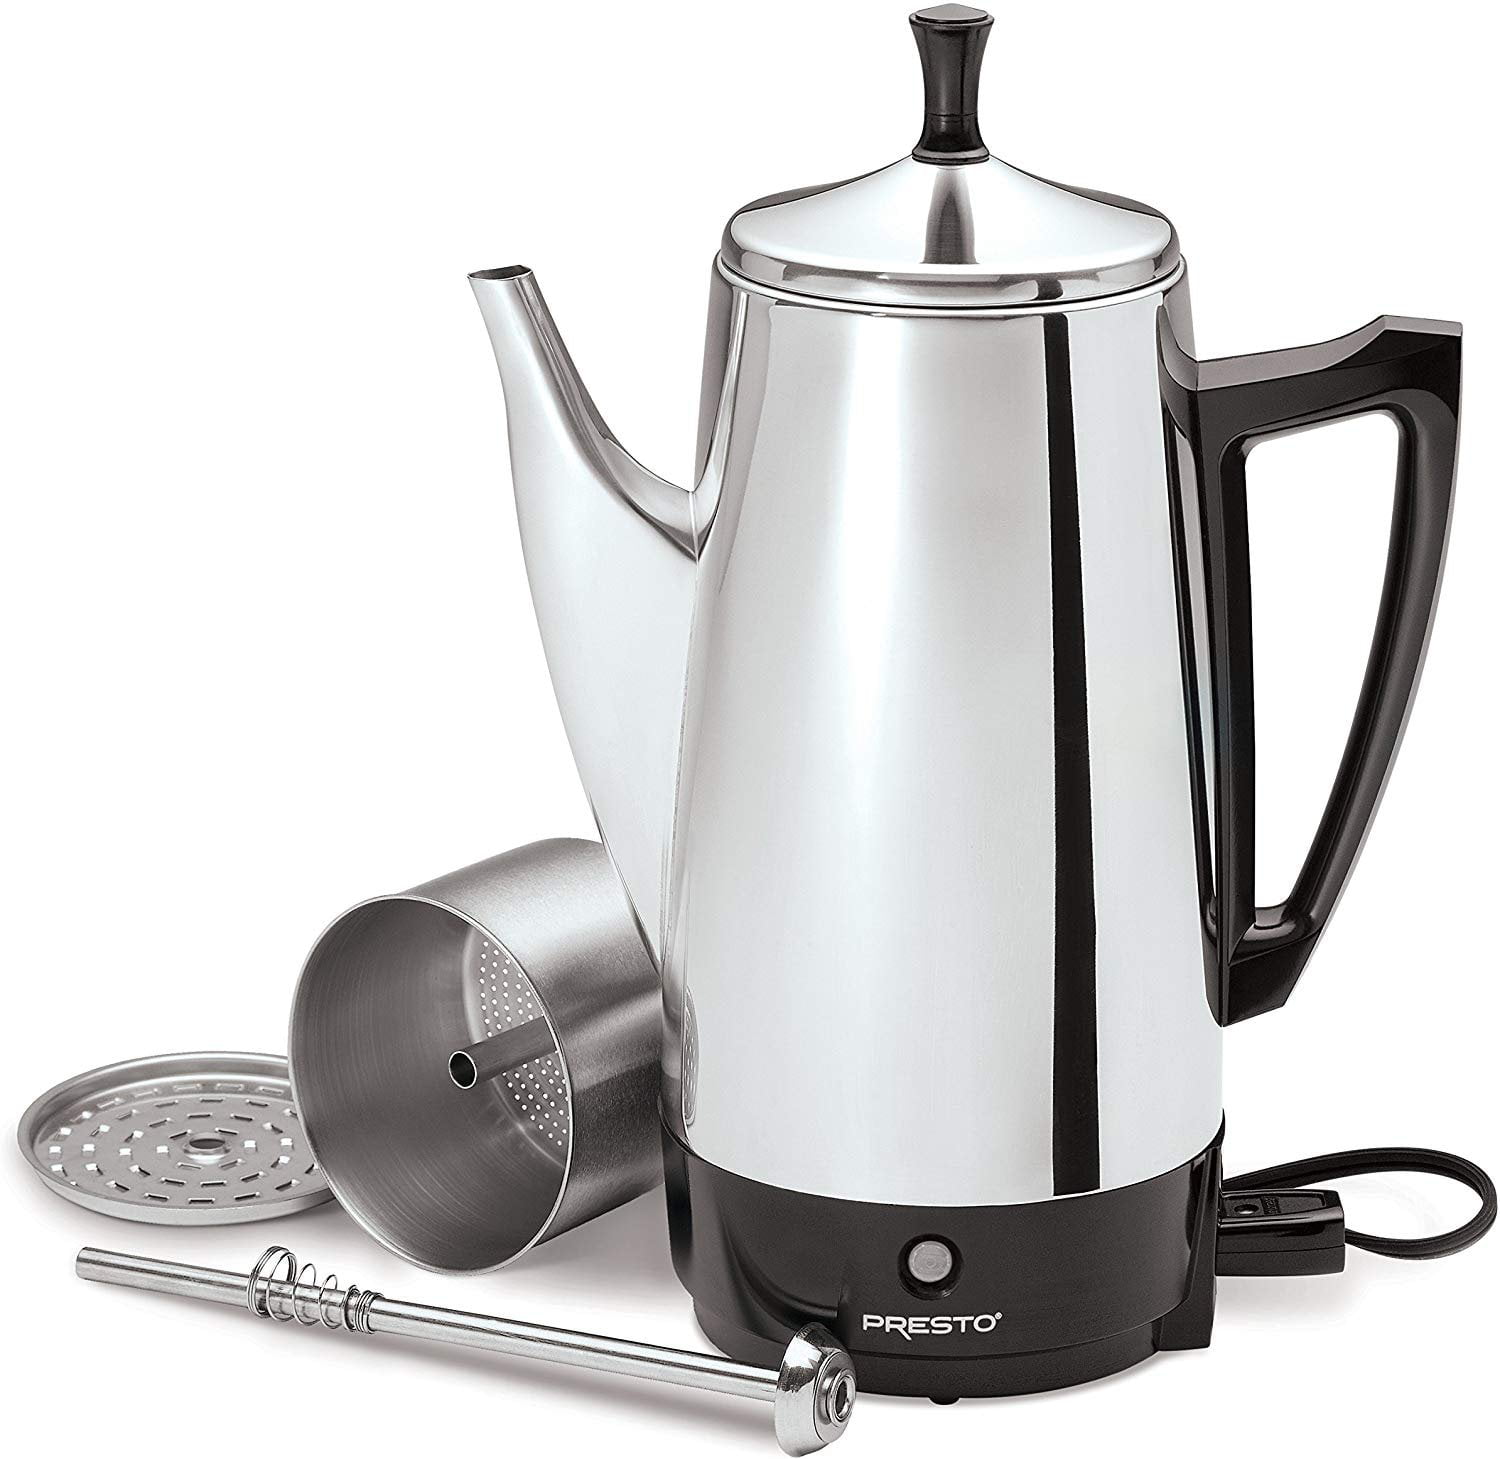 SENSEMAKE 12 Cup Electric Percolator Coffee Maker, Stainless Steel, Quick  Brew, Vintage Spout 110V/220V